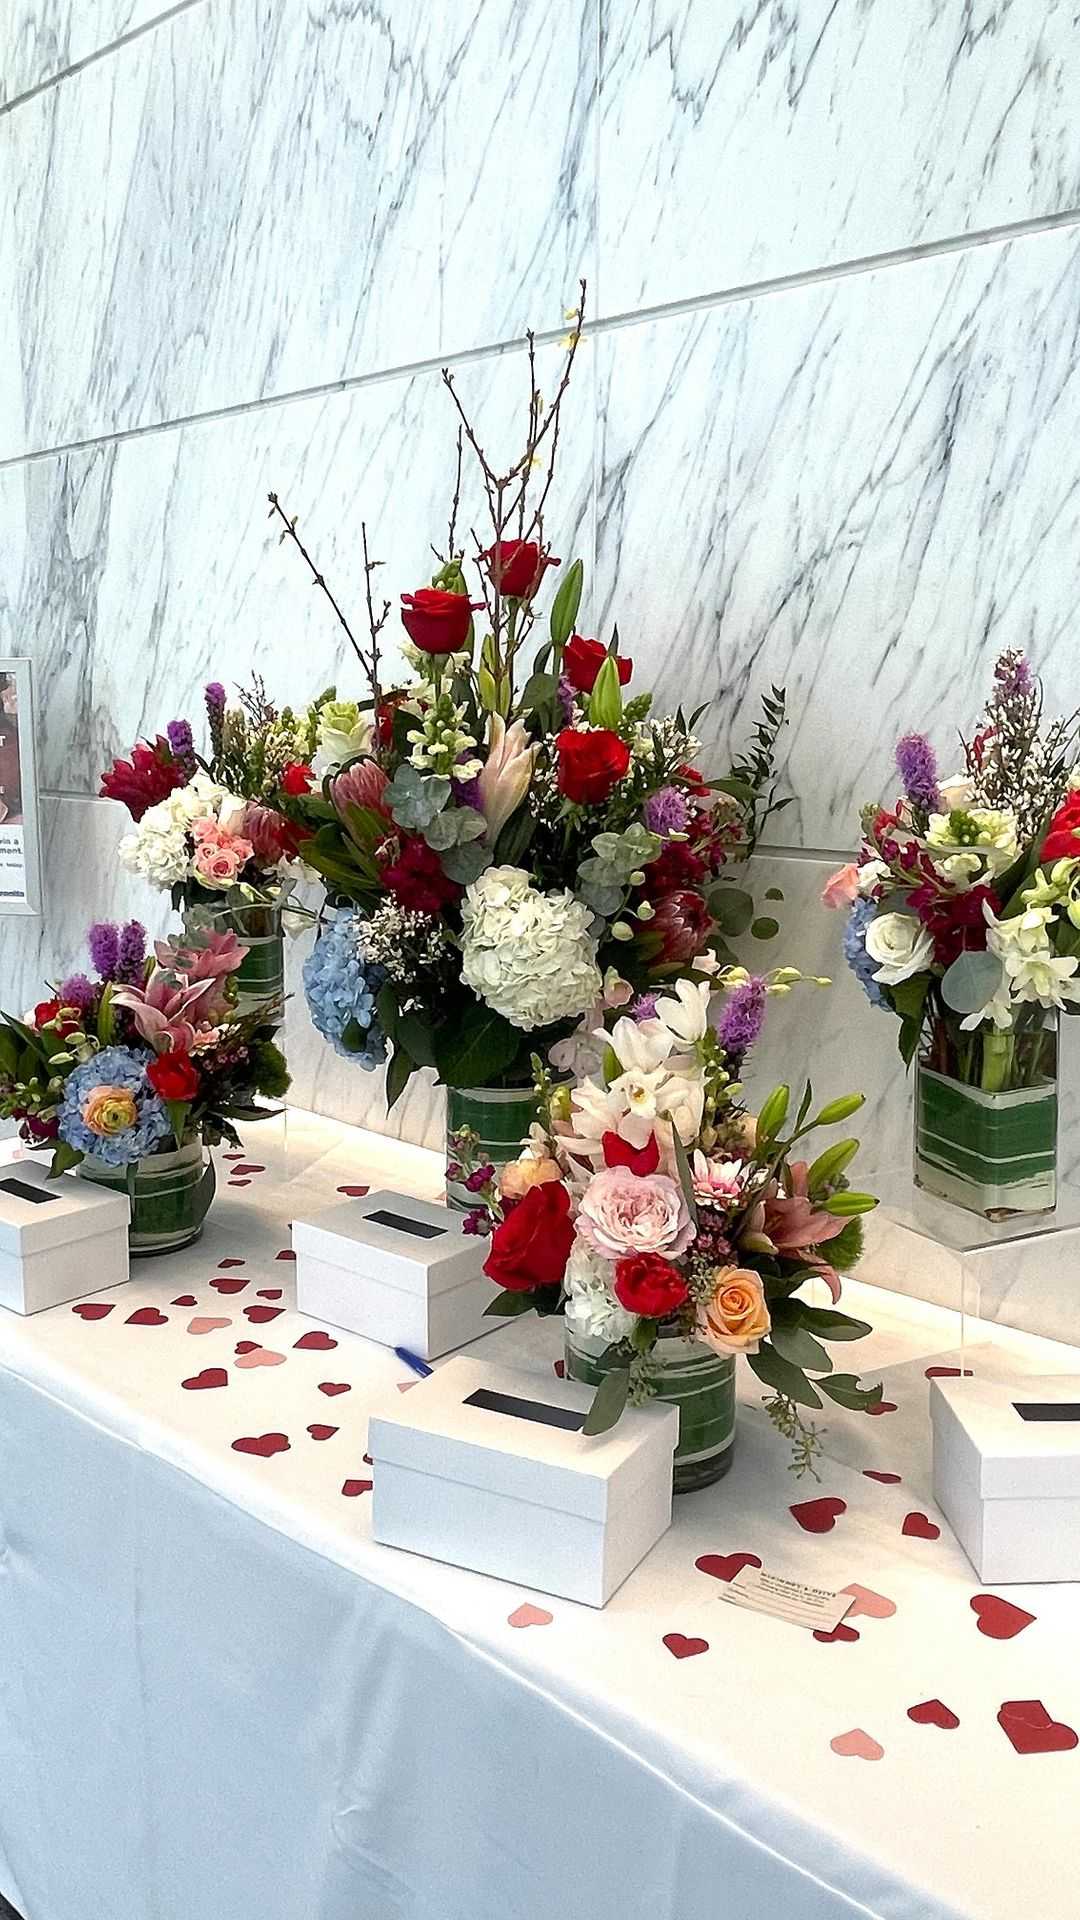 Love was in full bloom at McKinney & Olive’s Valentine’s Day pop-up with @chocolatesecrets! The Property Experience Team spread the love with a flower arrangement giveaway gifting five customers stunning flowers by @flowersbyterranova. 🌹 Congratulations to our lucky winners!